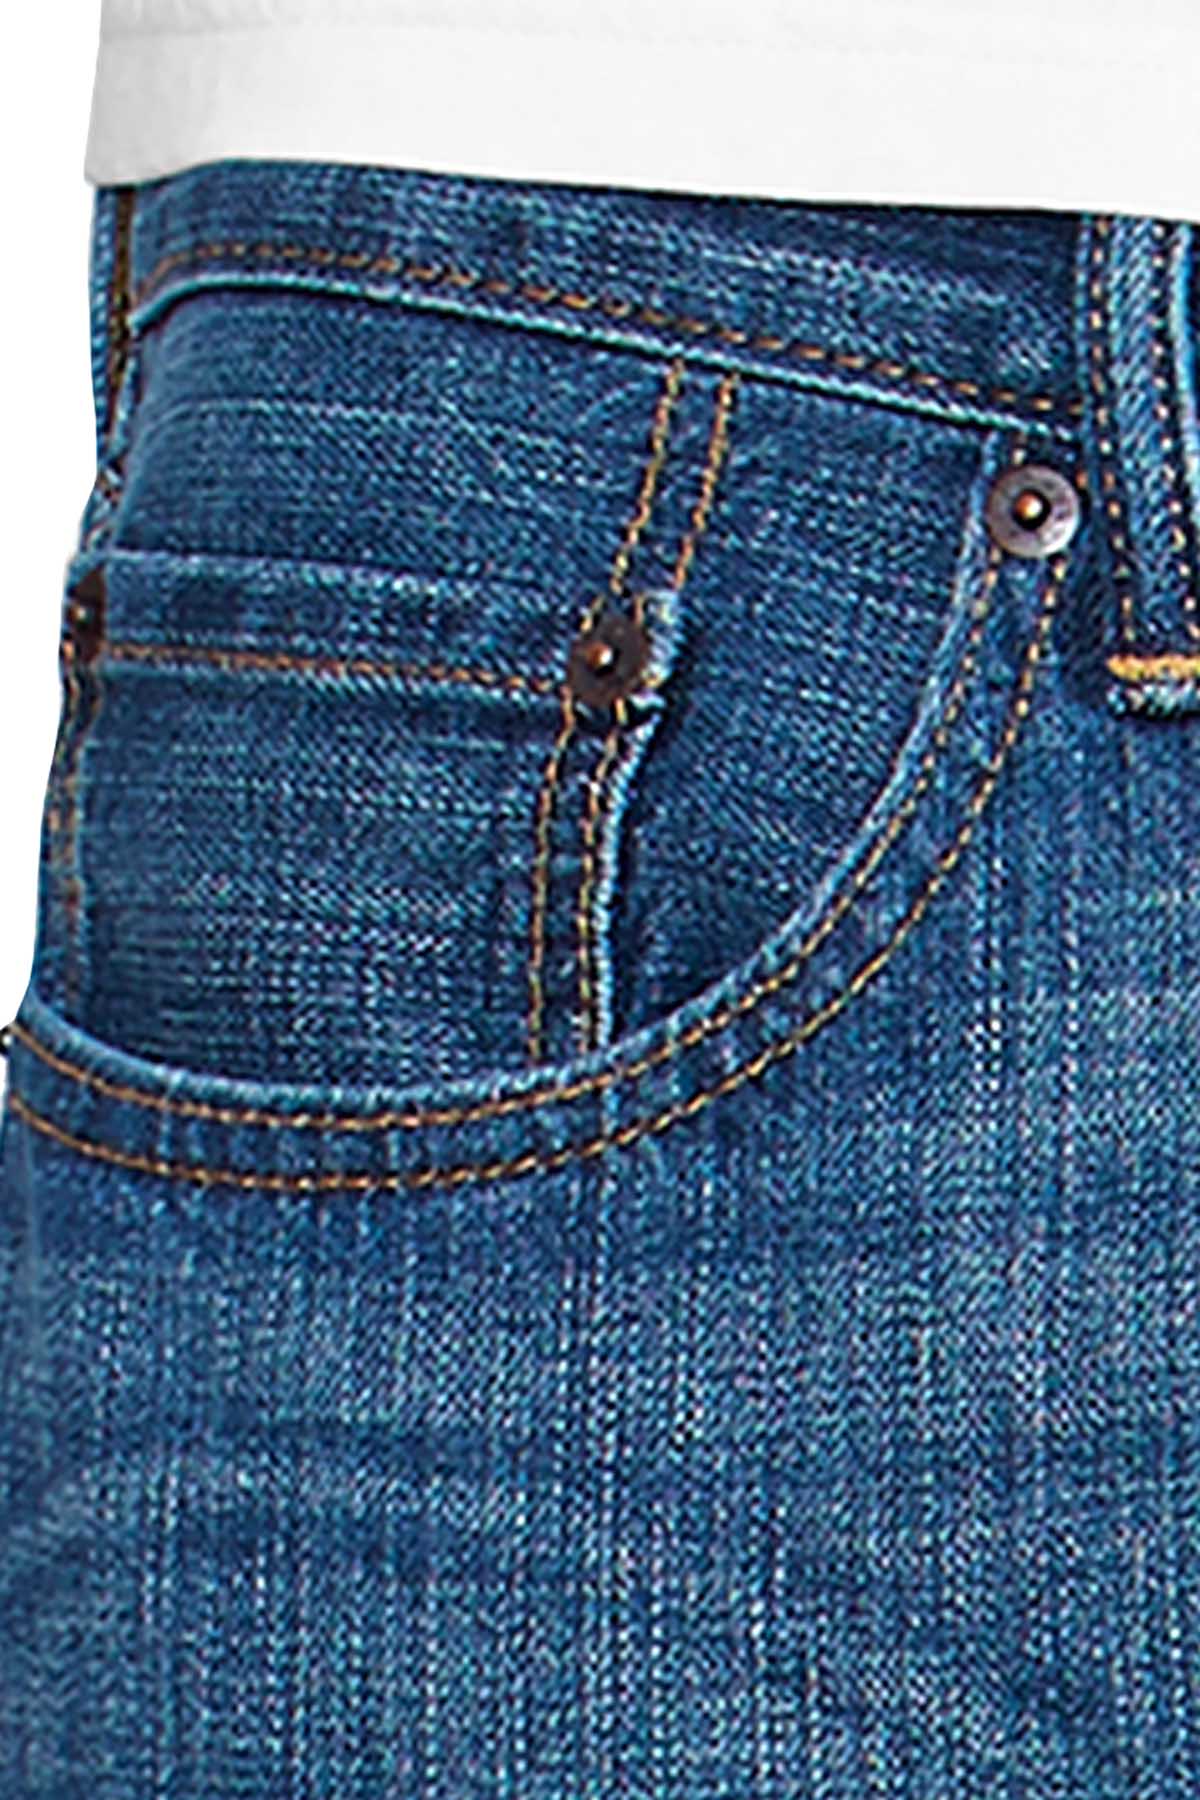 Levi's Indie Blue 559™ Big/Tall Relaxed Straight Leg Jean